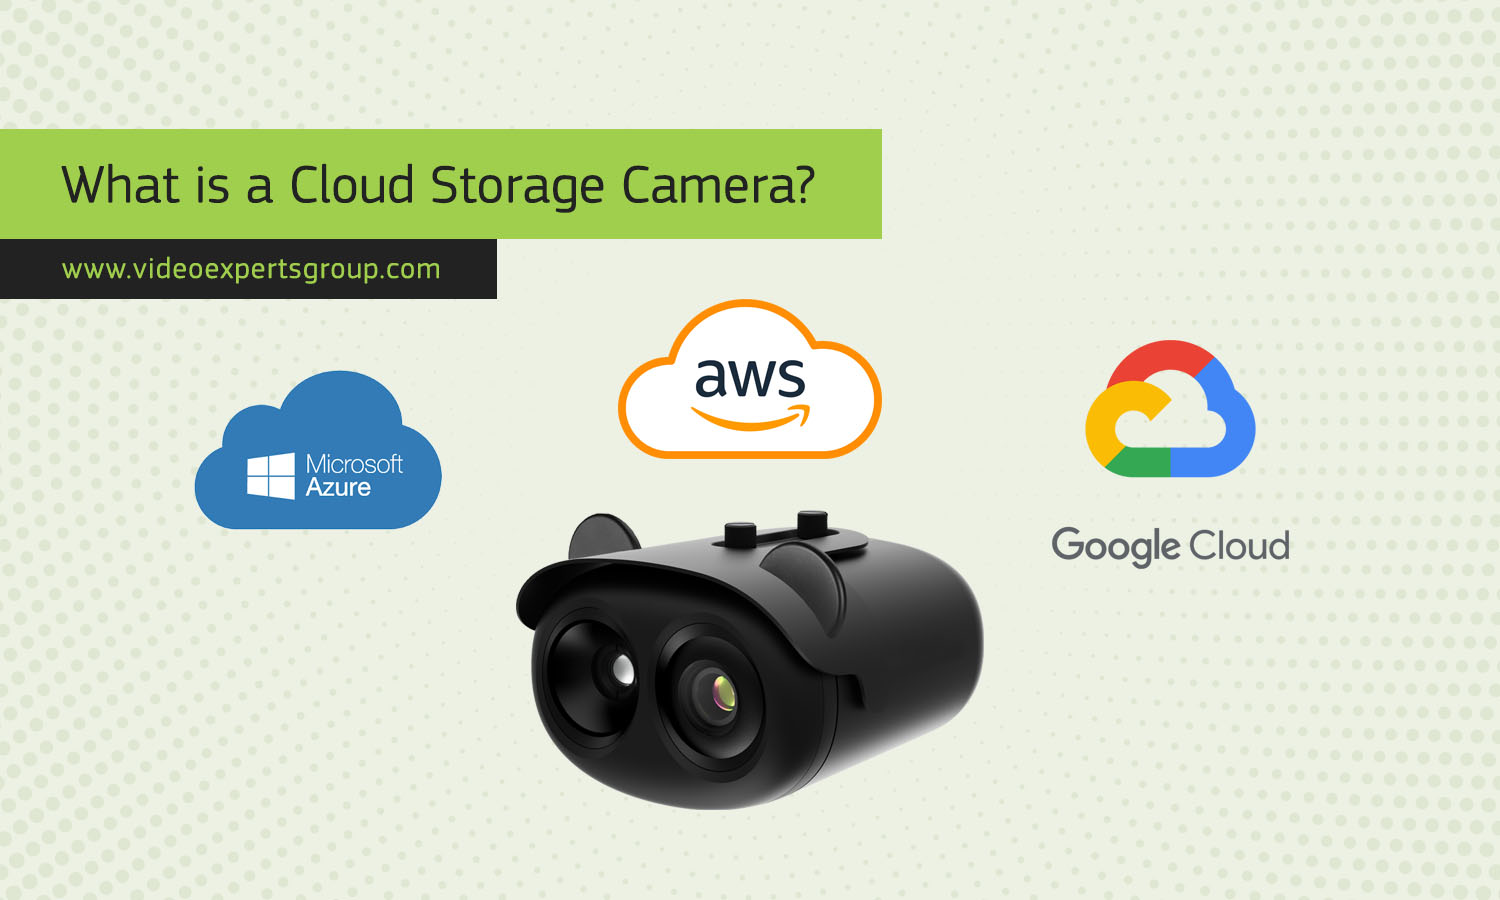 What is a Cloud Storage Camera?